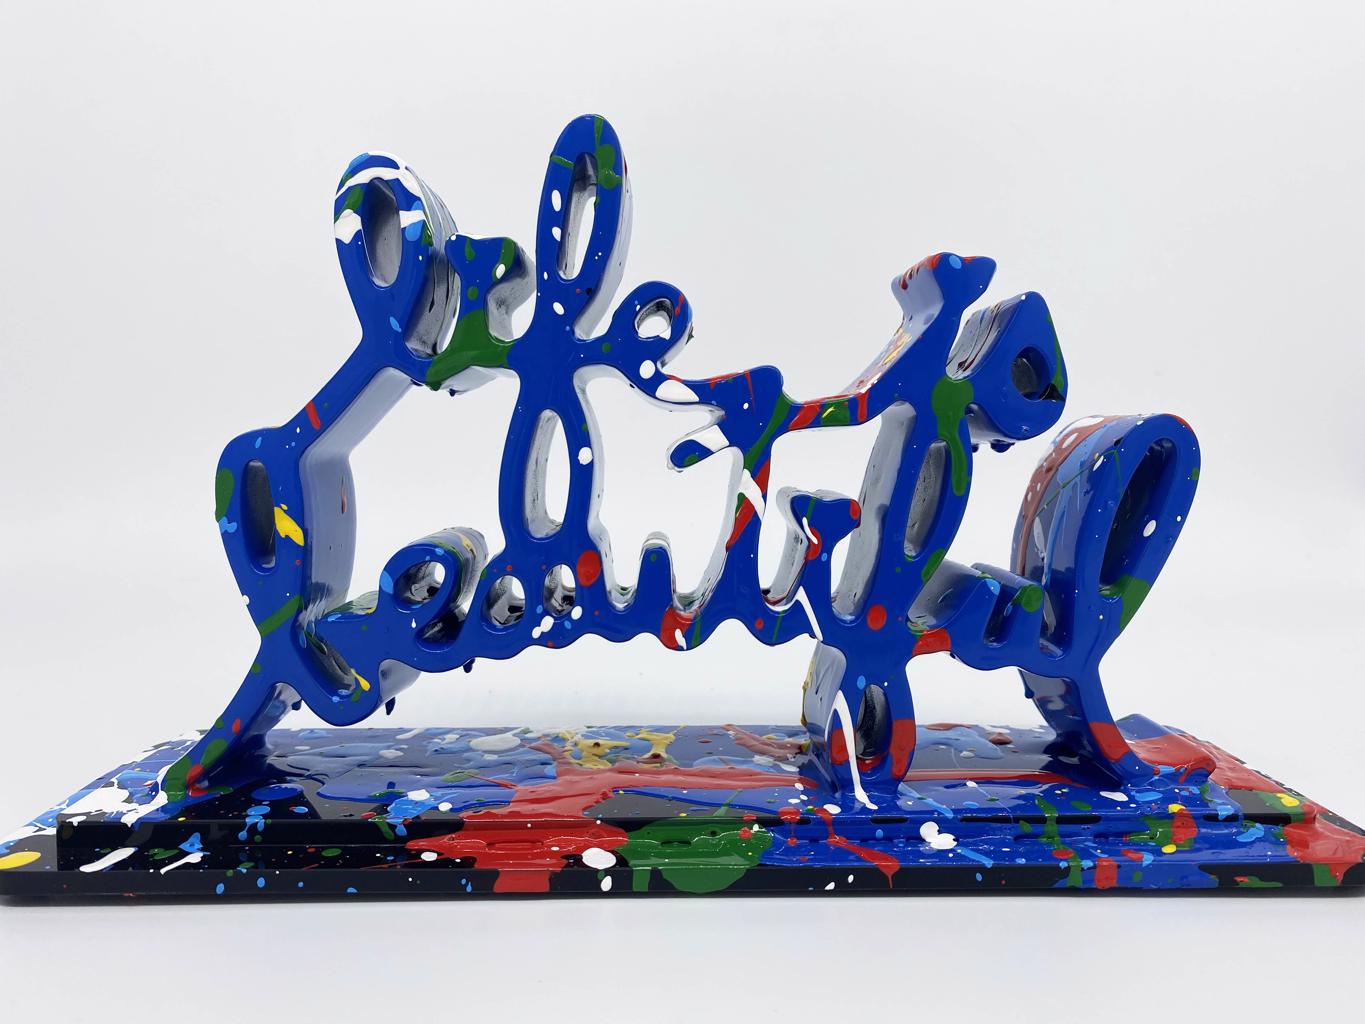 Mr. Brainwash, 'Life is Beautiful -Dipped Splash', 2020 | Blue | Available for Sale | Image of signed sculpture